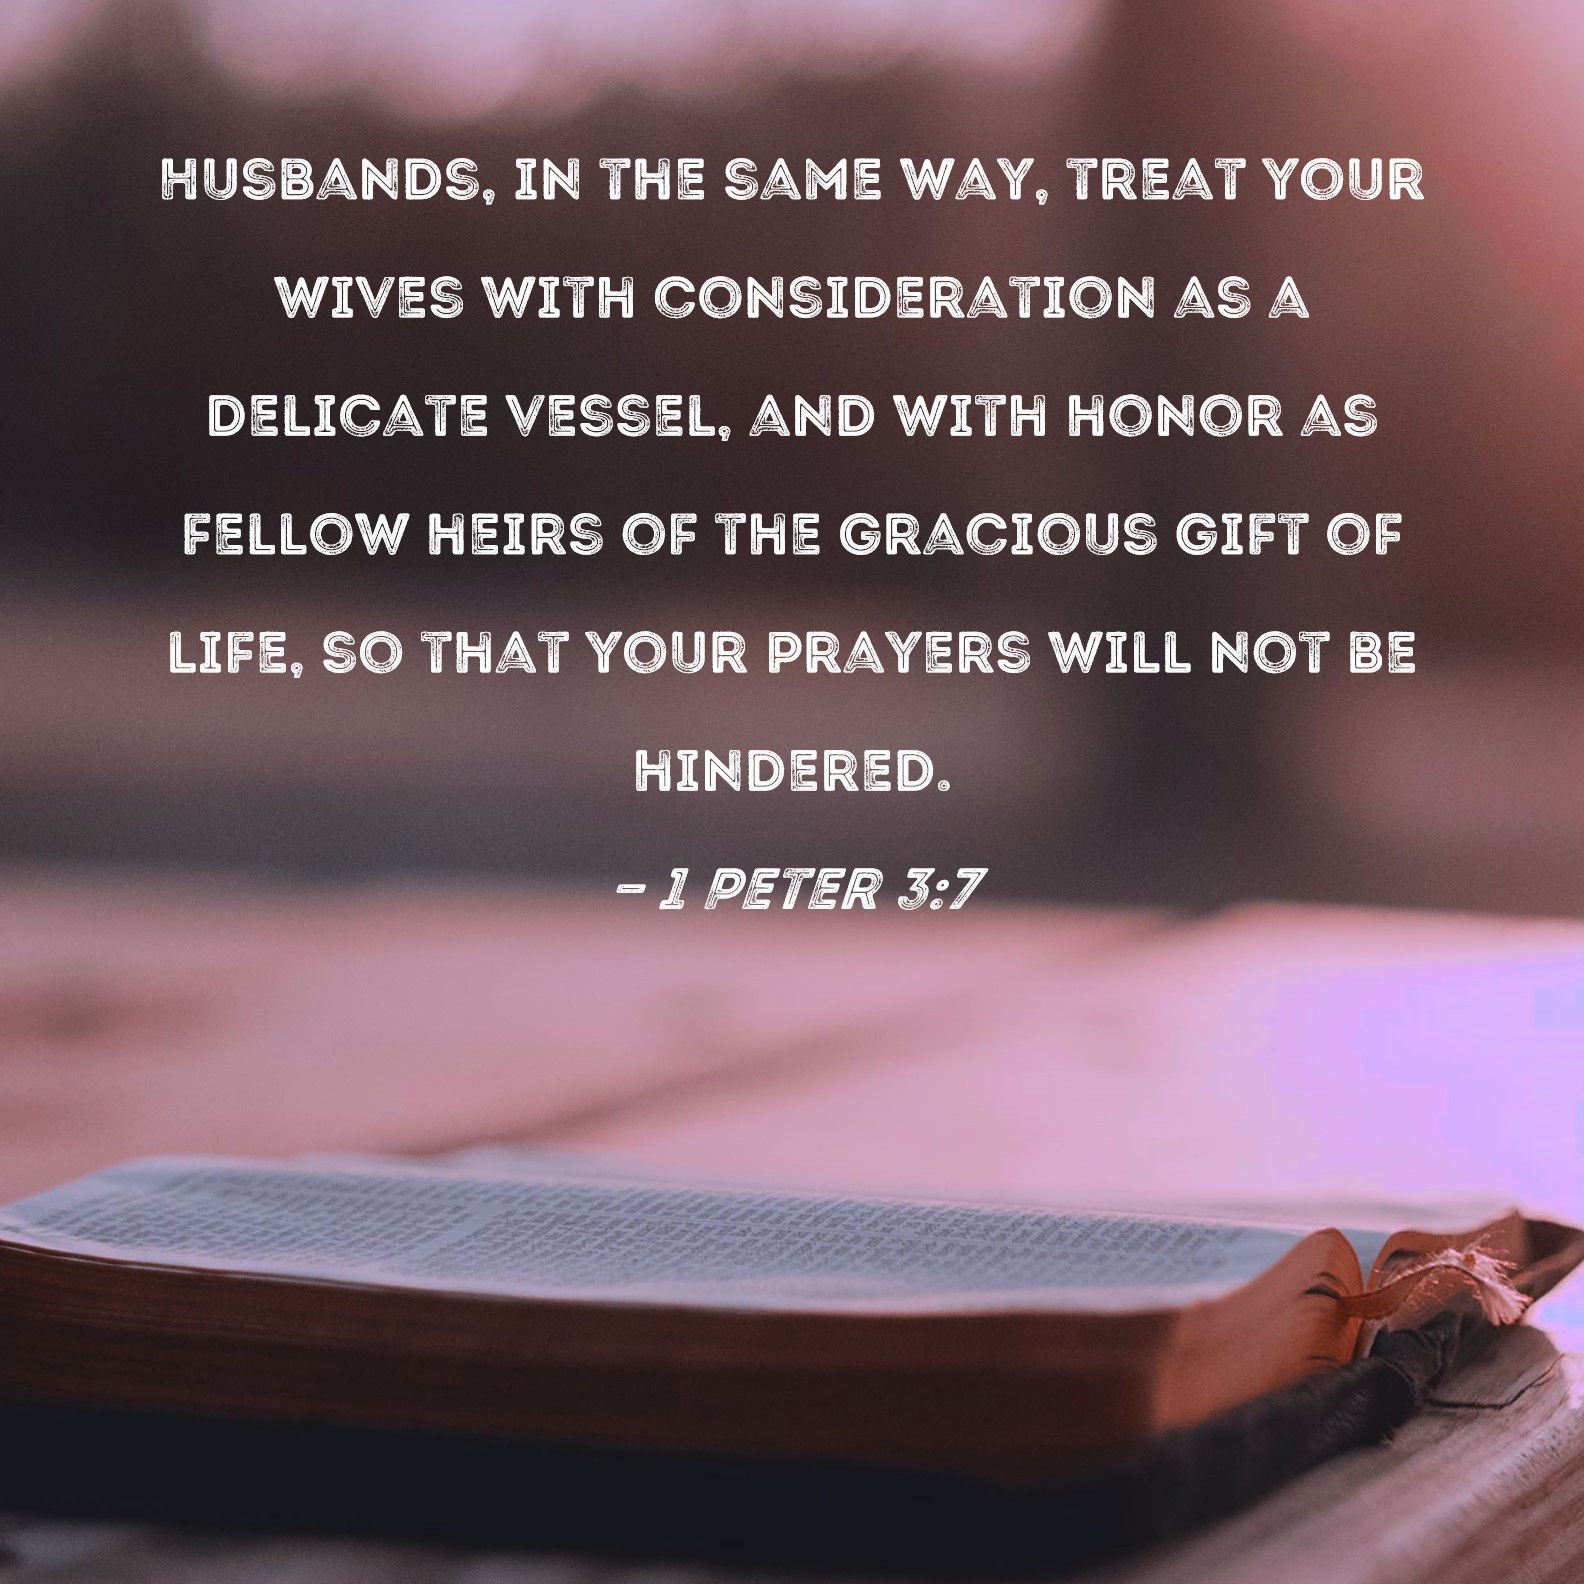 1 Peter 37 Husbands, in the same way, treat your wives with consideration as a delicate vessel, and with honor as fellow heirs of the gracious gift of life, so that your